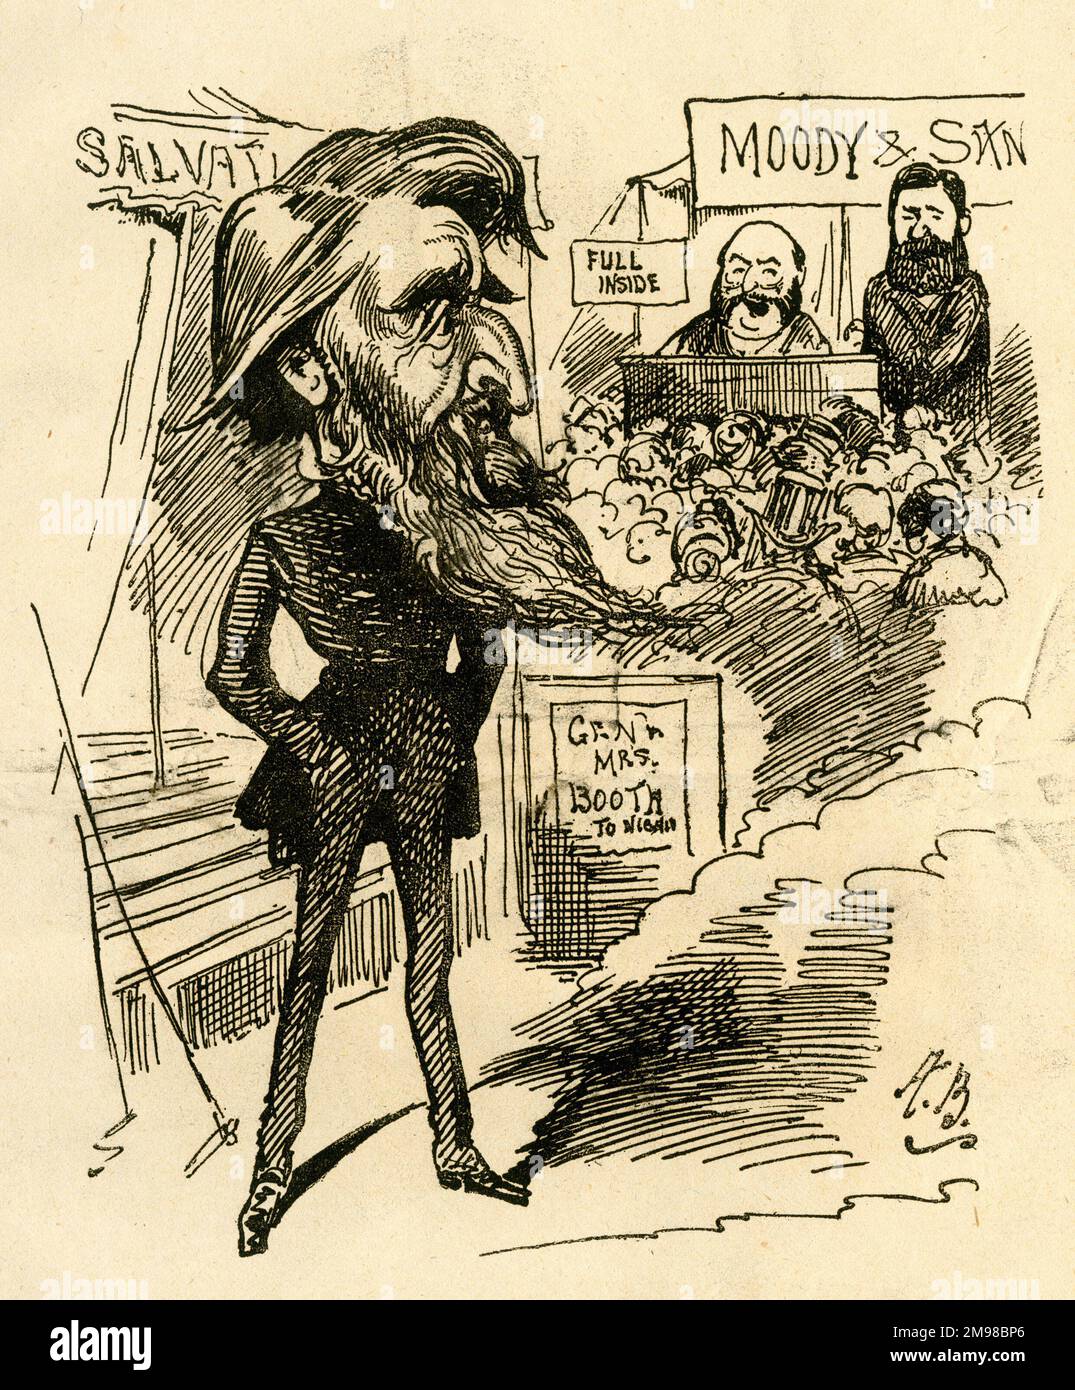 Cartoon, William Booth, founder of the Salvation Army, looking suspiciously at the visiting American evangelists, Moody & Sankey, who seem to be attracting larger crowds.  He says: How can I do a paying business with all this opposition? Stock Photo